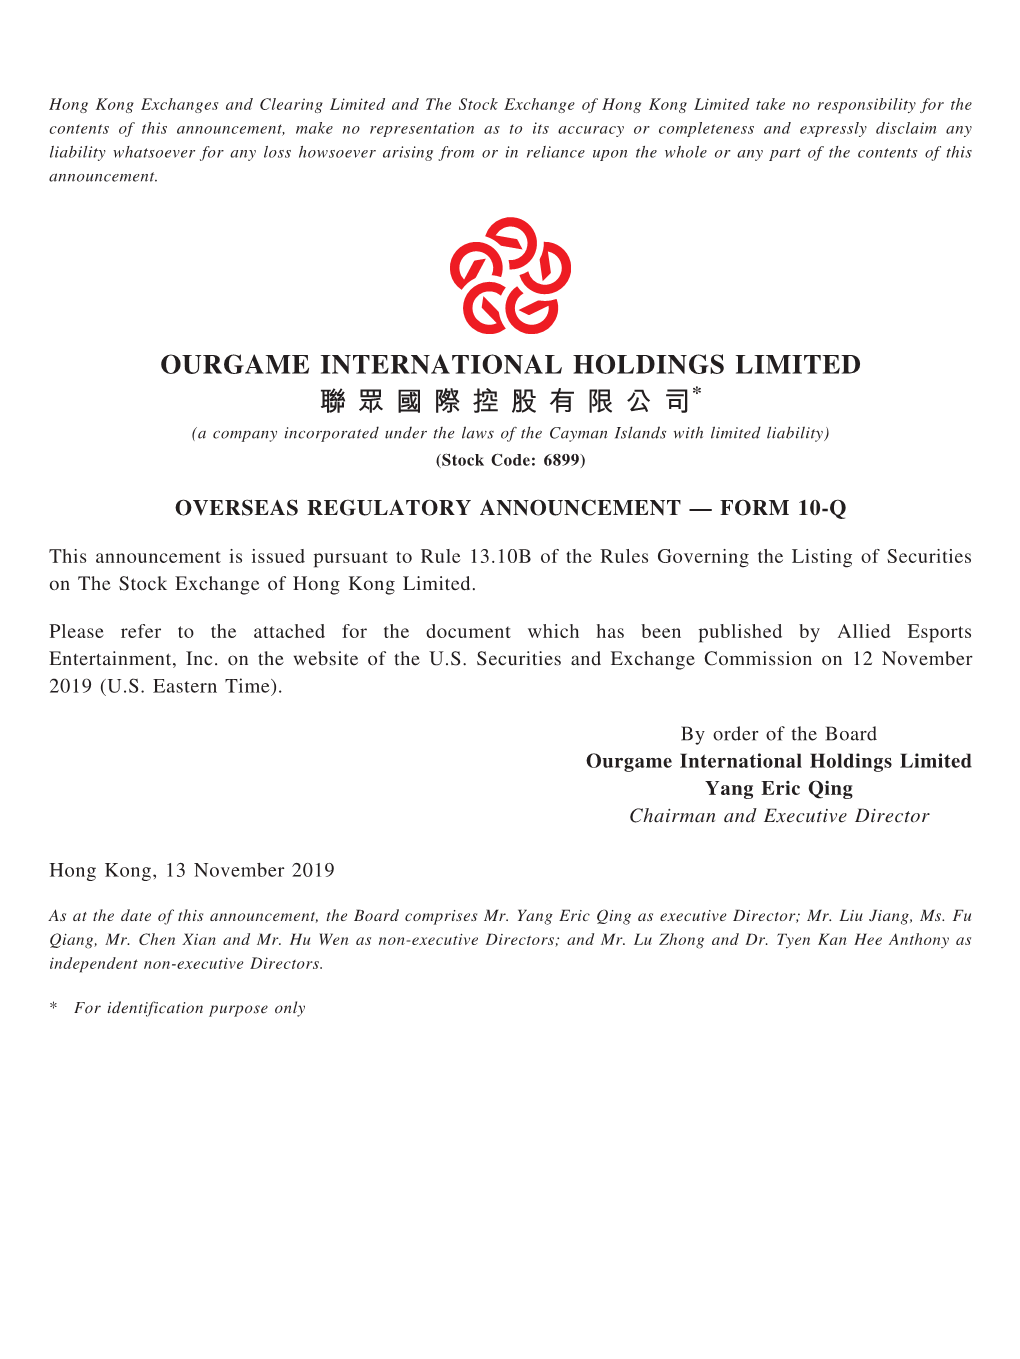 OURGAME INTERNATIONAL HOLDINGS LIMITED 聯 眾 國 際 控 股 有 限 公 司* (A Company Incorporated Under the Laws of the Cayman Islands with Limited Liability) (Stock Code: 6899)